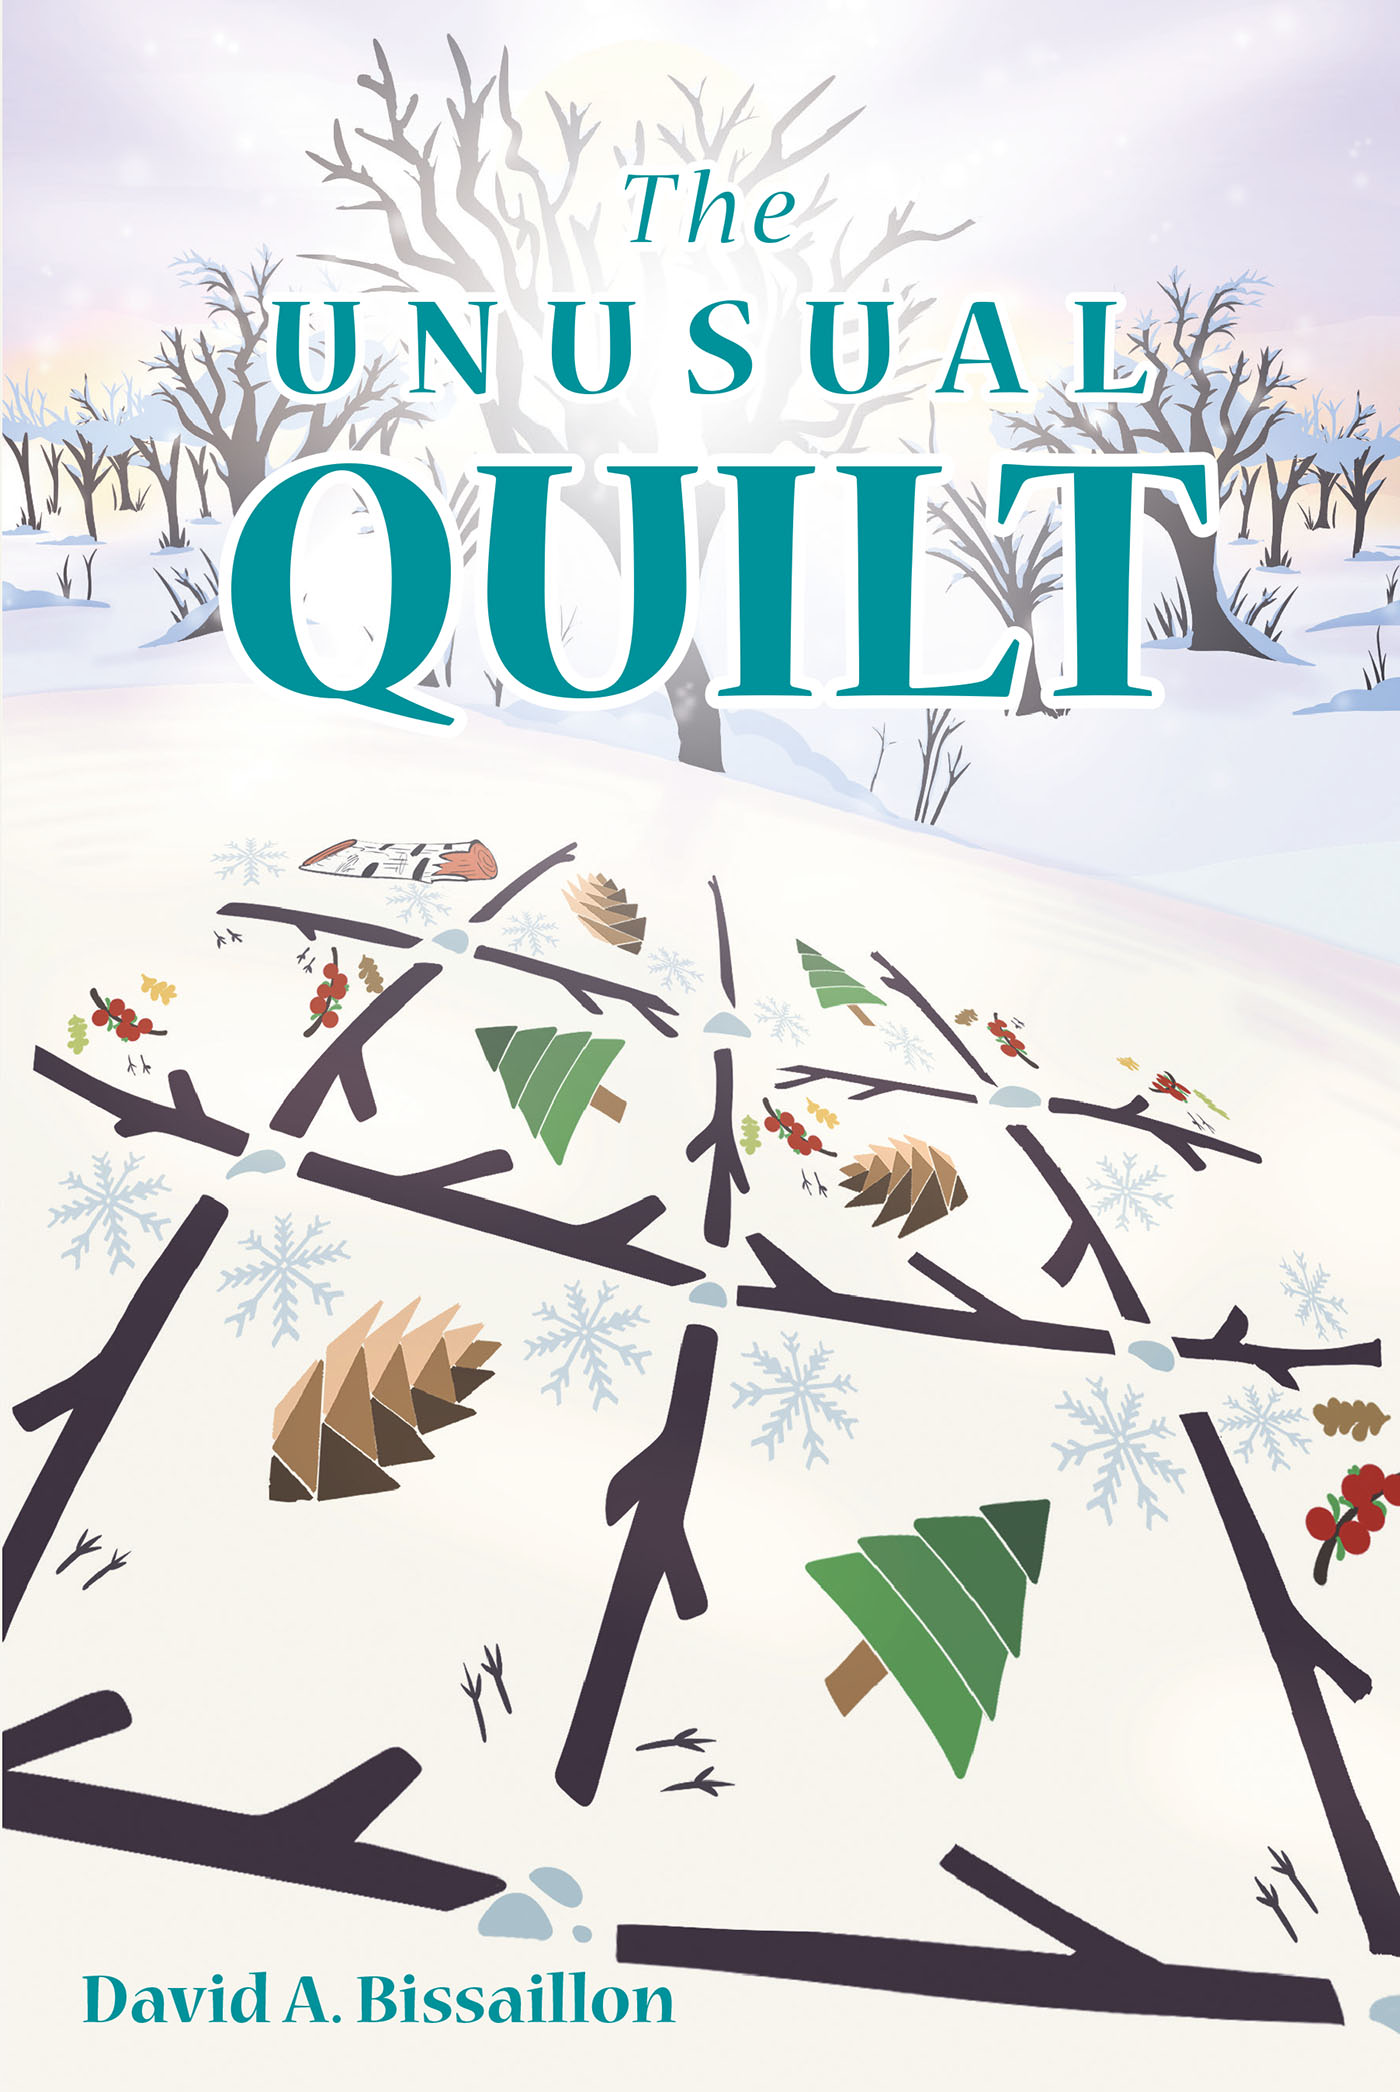 Author David A. Bissaillon’s New Book, "The Unusual Quilt," Was Intended as a Bedtime Story to Help Children Relax Their Minds and Sleep Soundly Through the Night